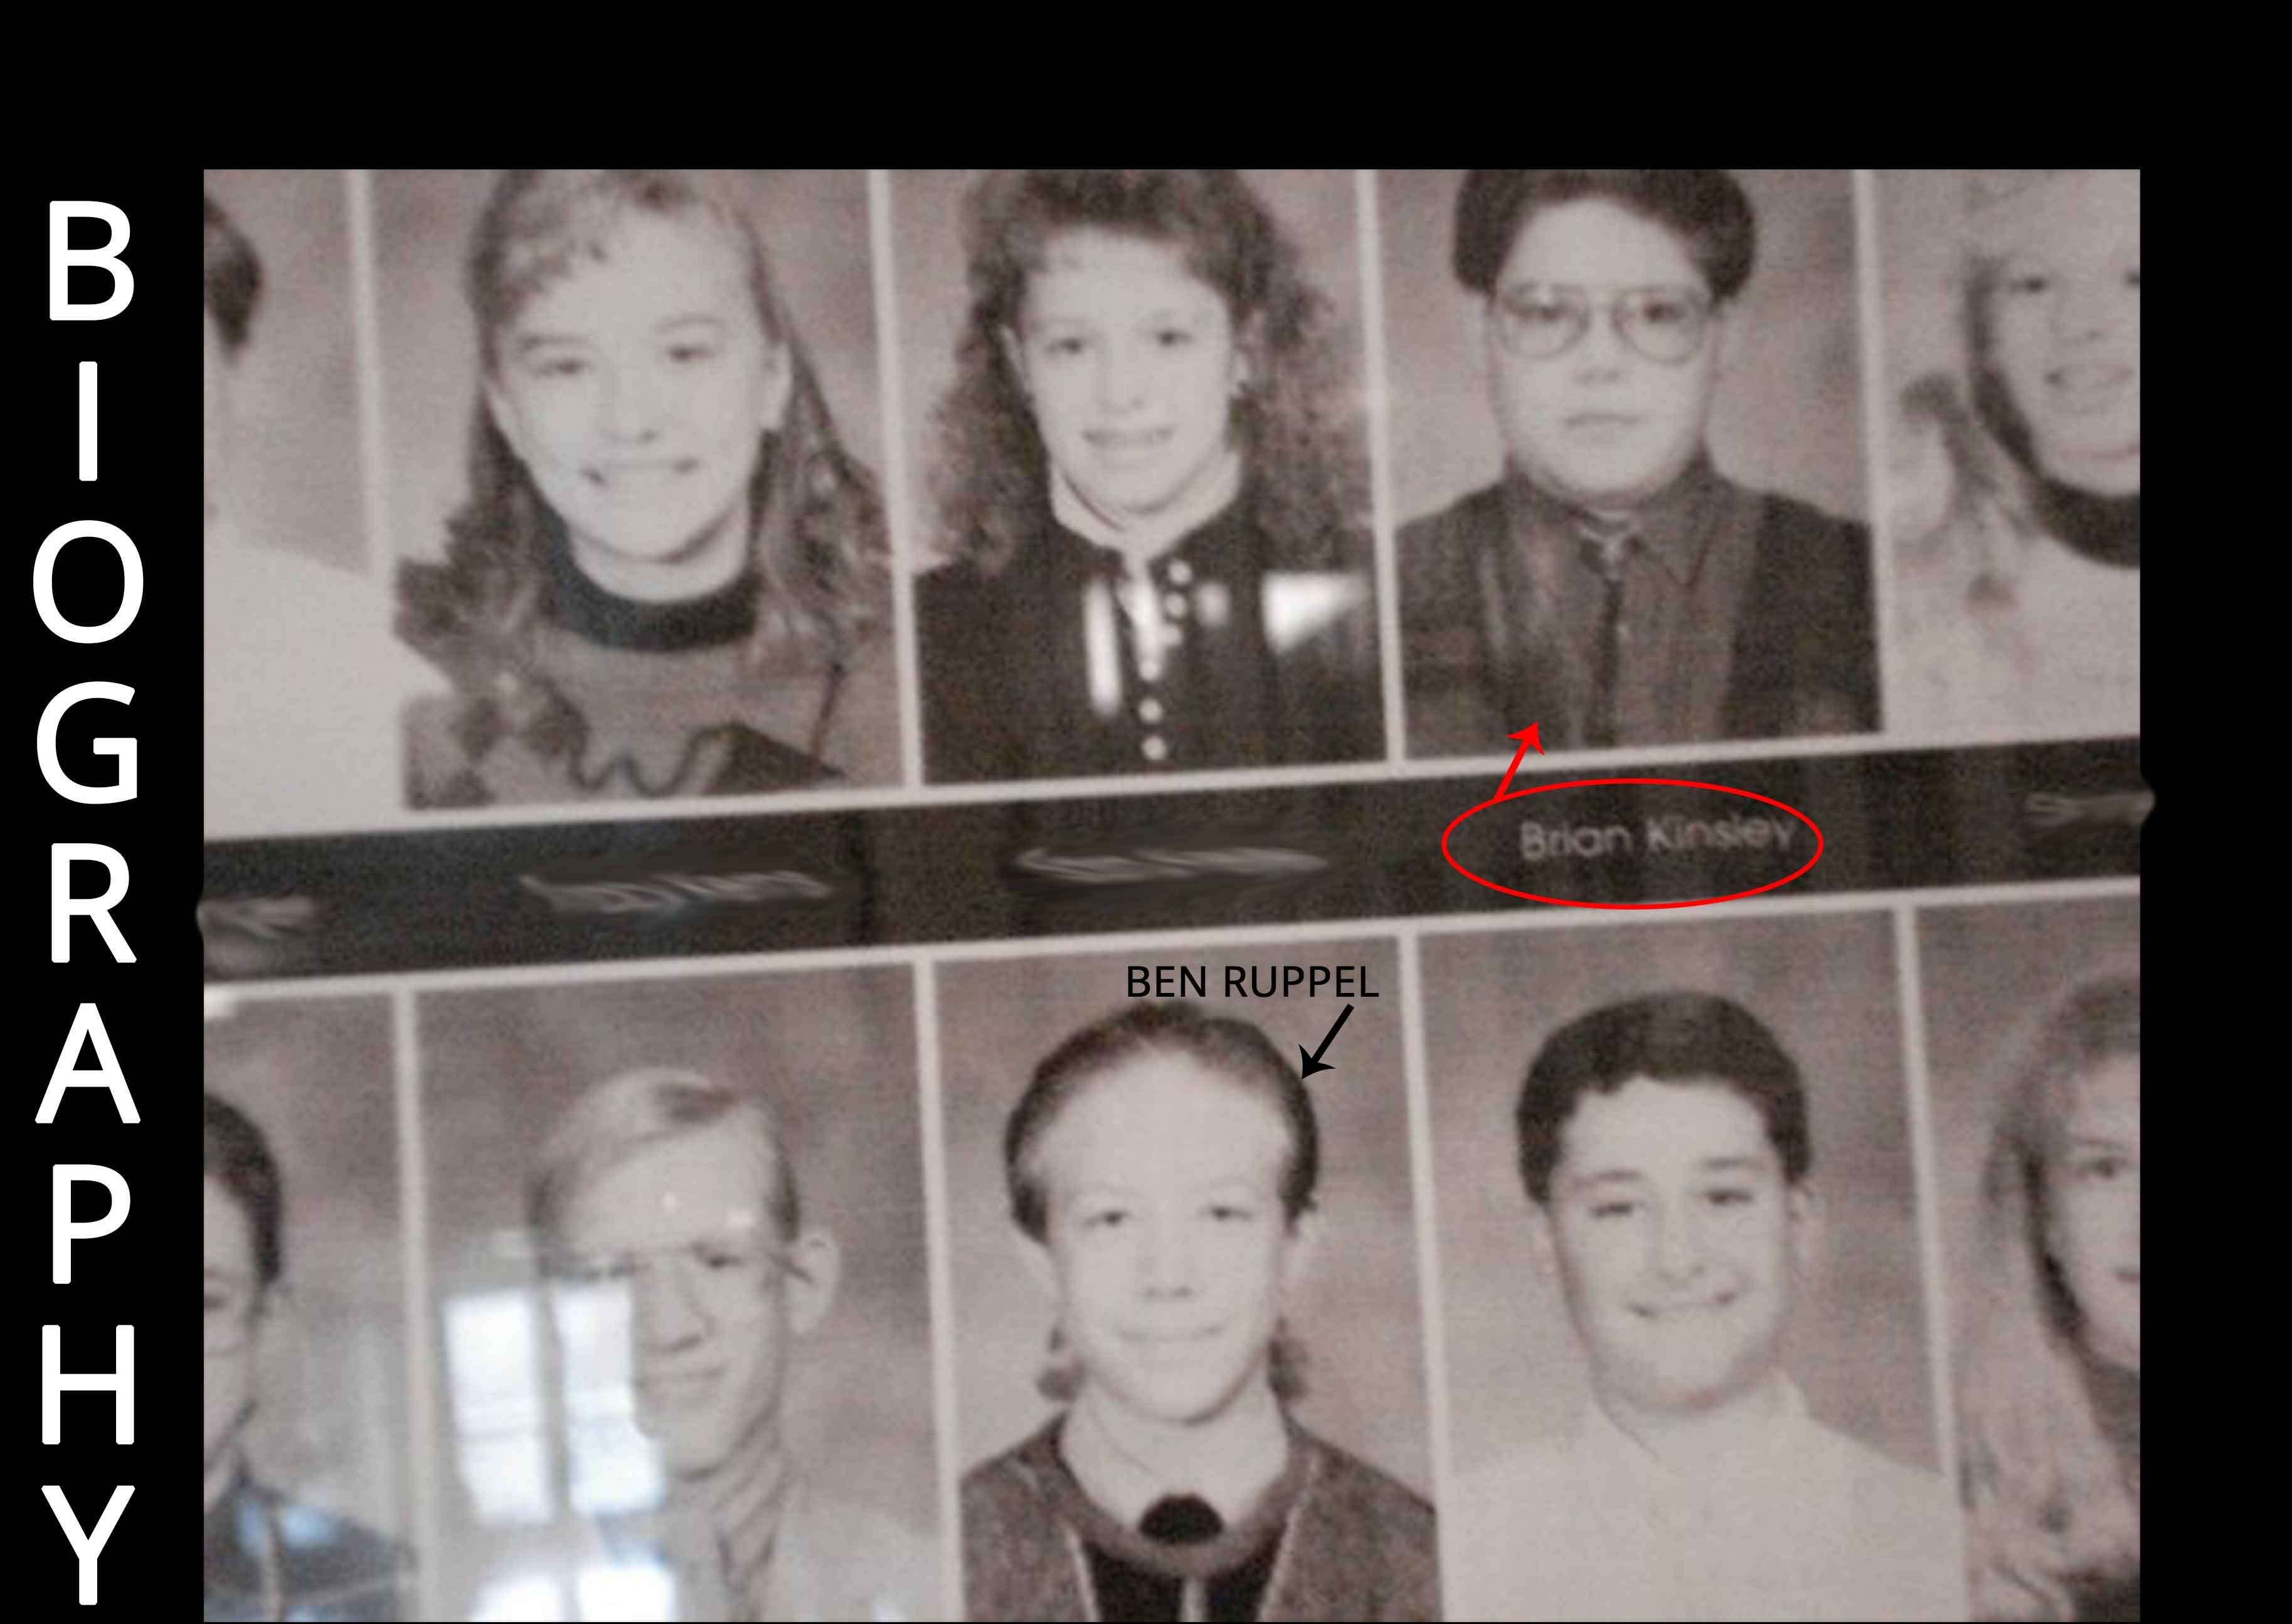 Picture of Brian and Ben from their 5th grade yearbook